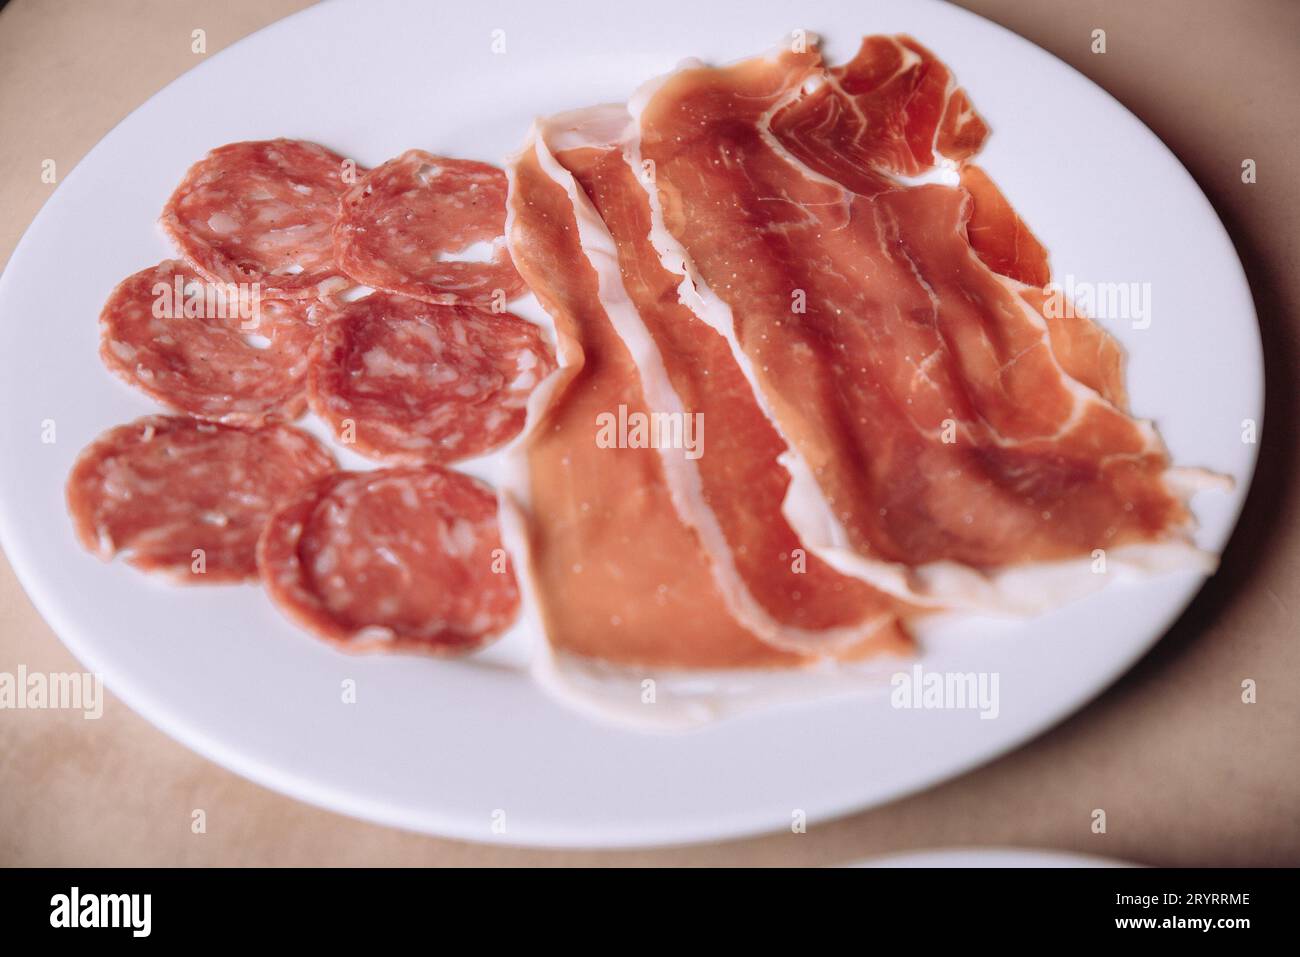 A white plate with assorted cured meats including salami and prosciutto Stock Photo